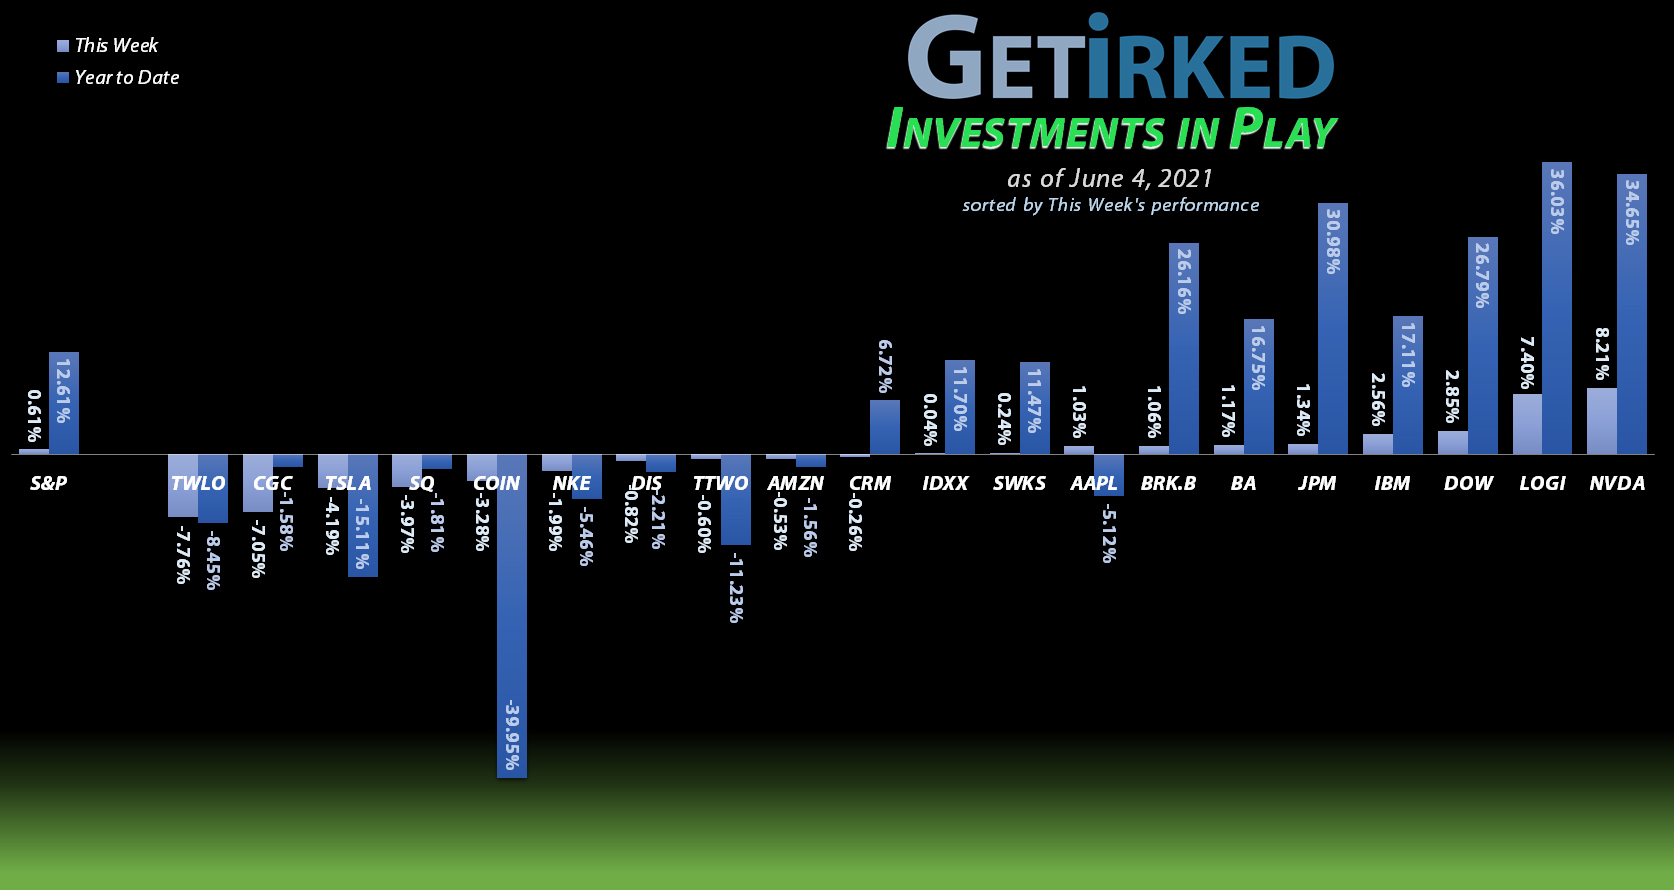 Get Irked - Investments in Play - June 4, 2021